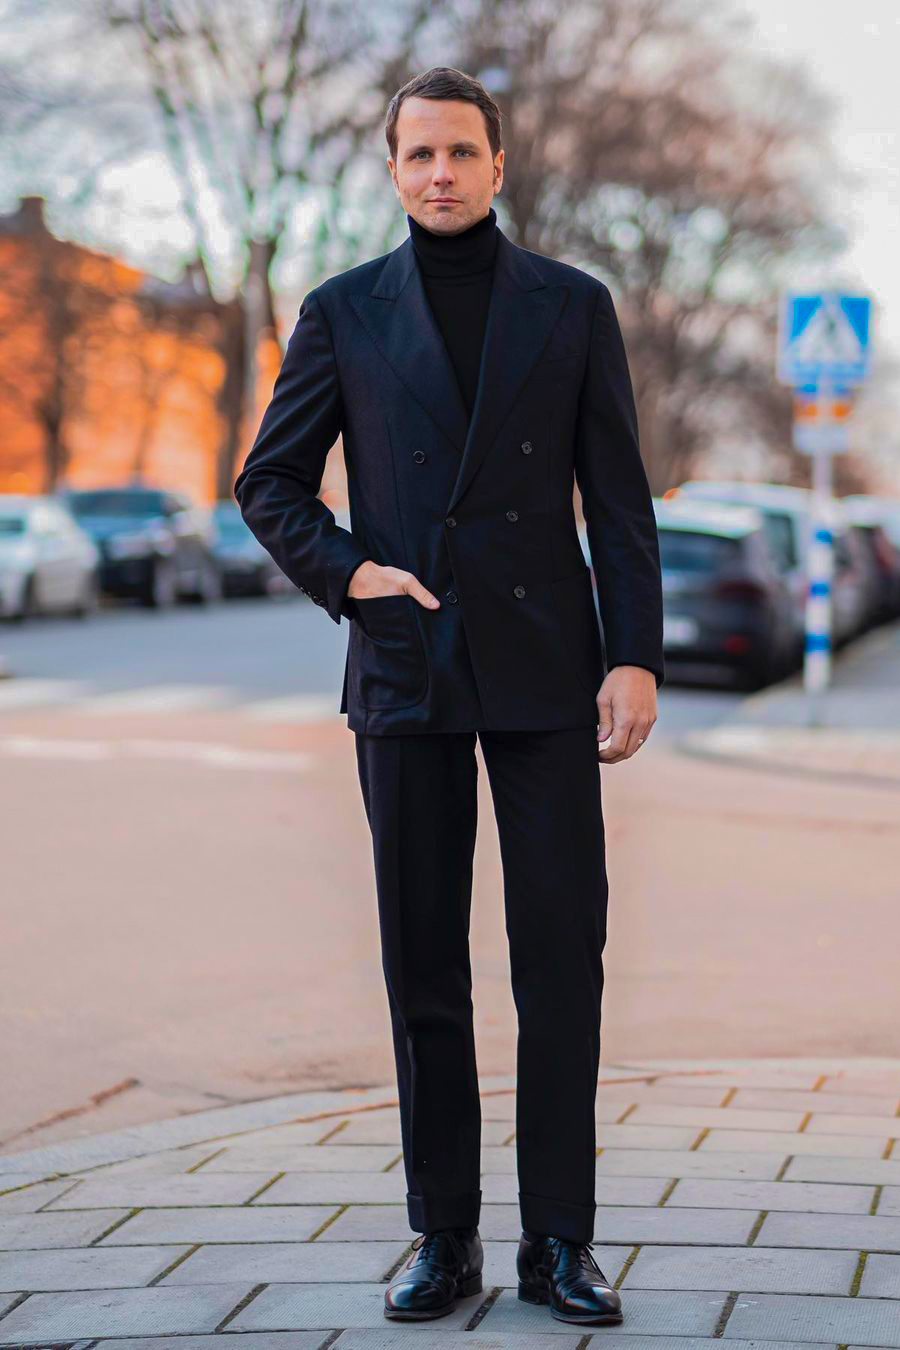 Navy suit, black turtleneck, and black oxford shoes outfit